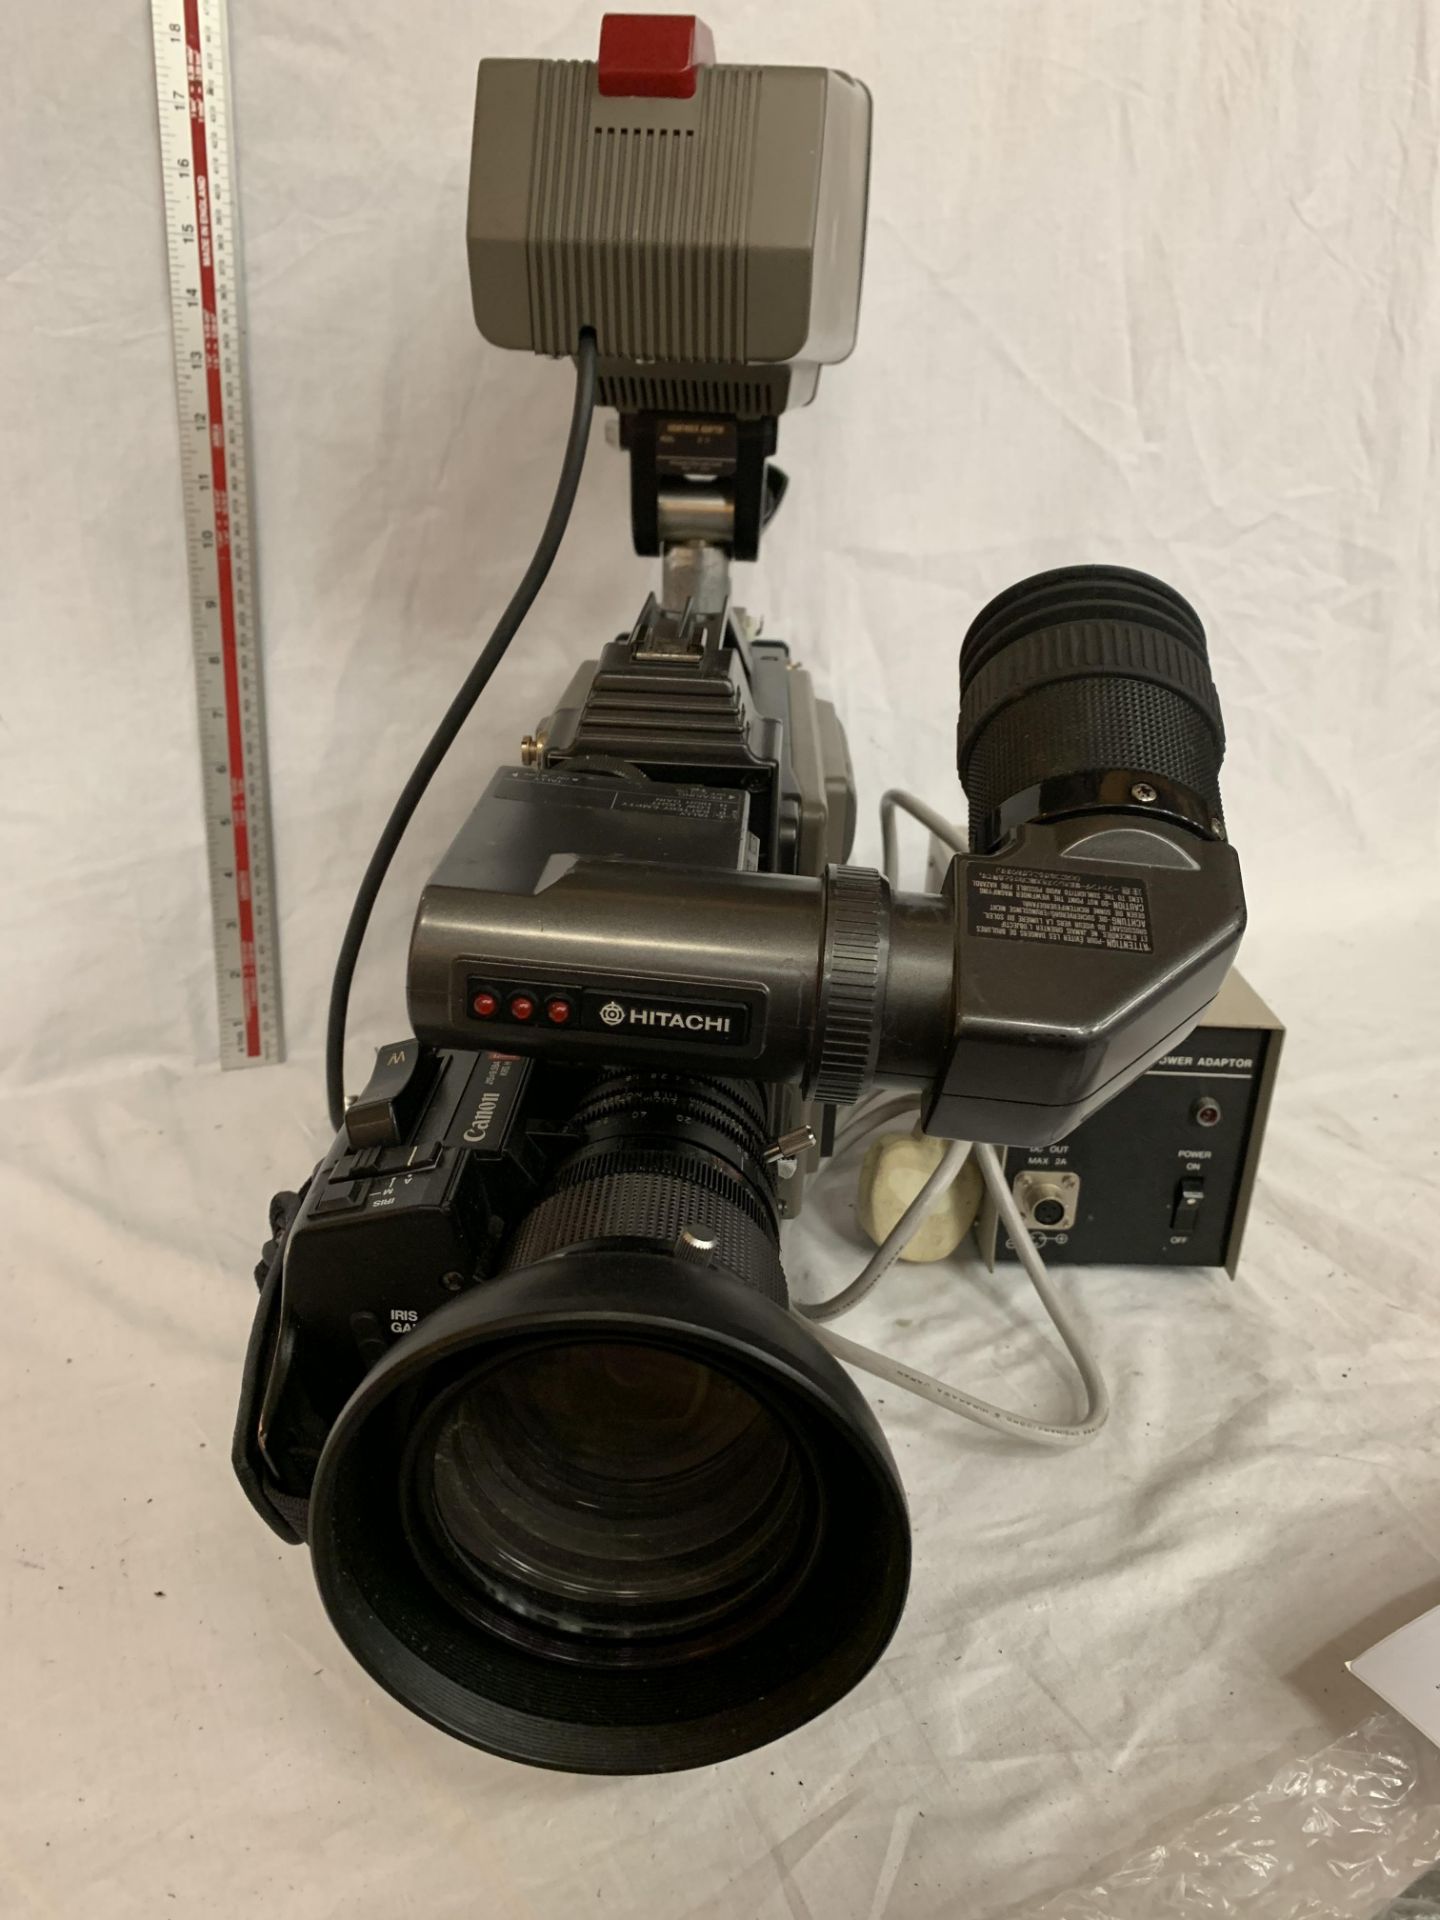 A HITACHI C1 BROADCAST CAMERA WITH ATTACHED SCREEN AND POWER PACK - Image 2 of 5